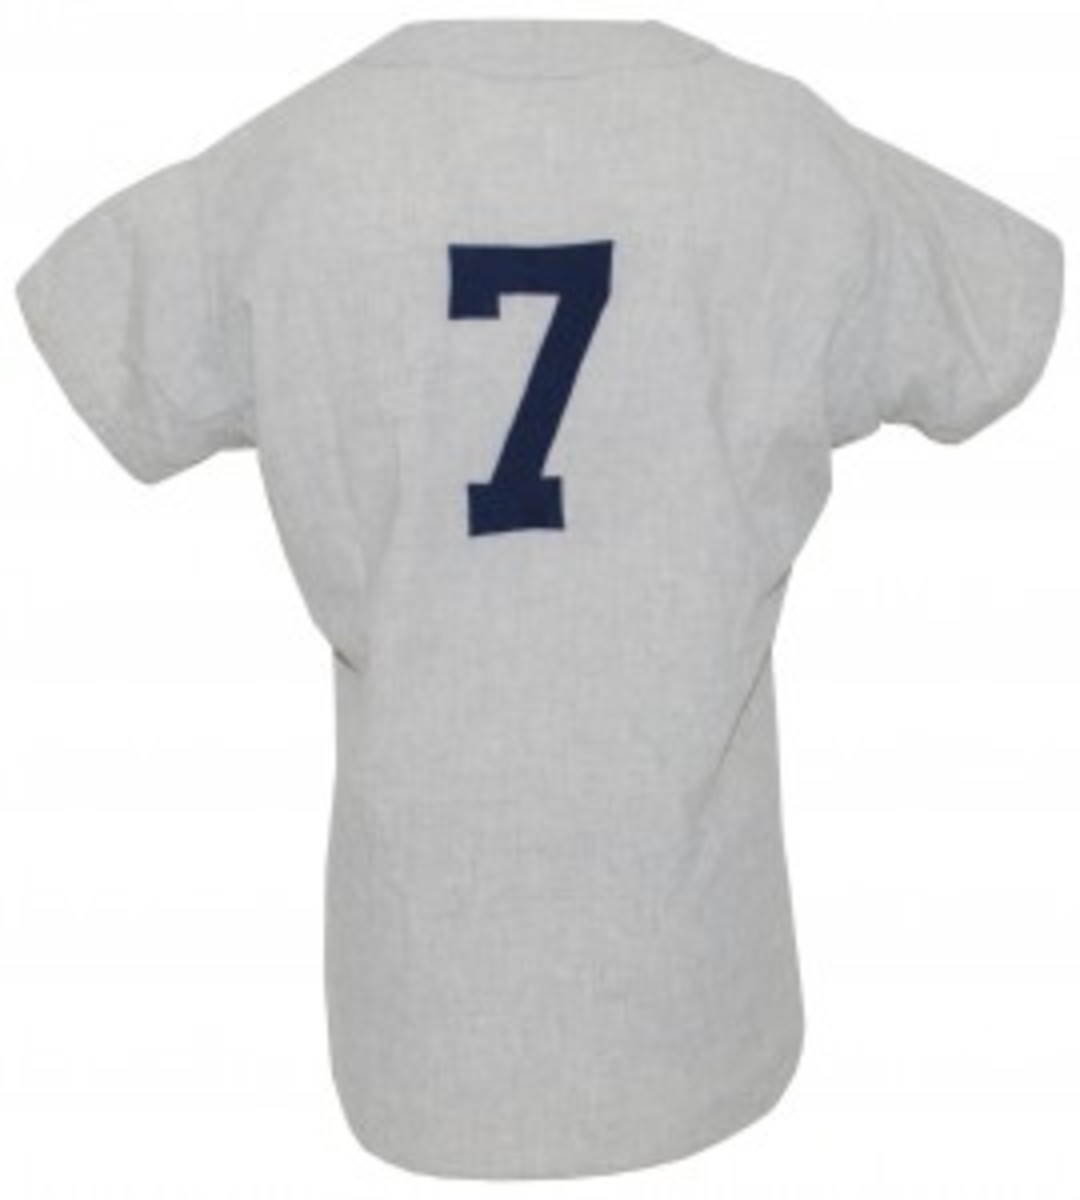 1958 Mickey Mantle NY Yankees game-used flannel road jersey attributed to the 1958 World Series, $114,000. Grey Flannel Auctions image.